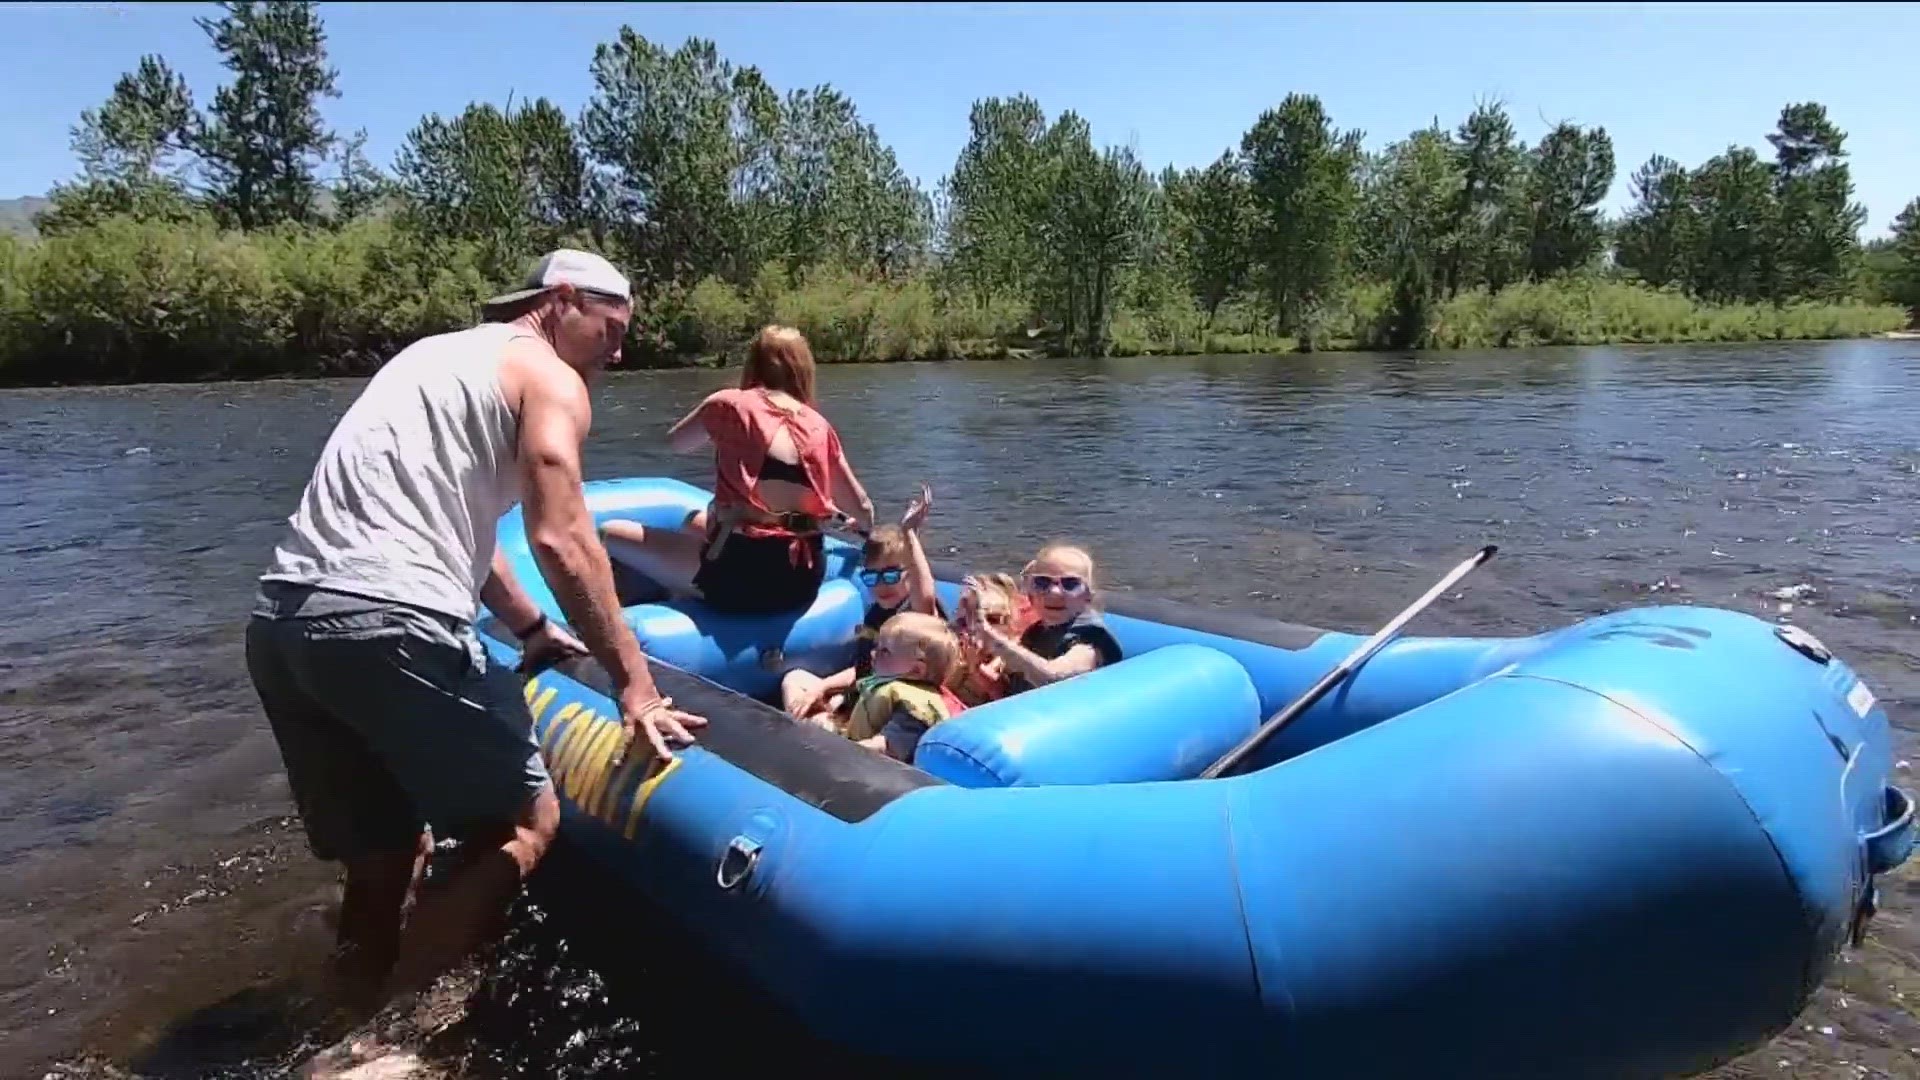 2023 Boise River float season comes to an end after labor day weekend.